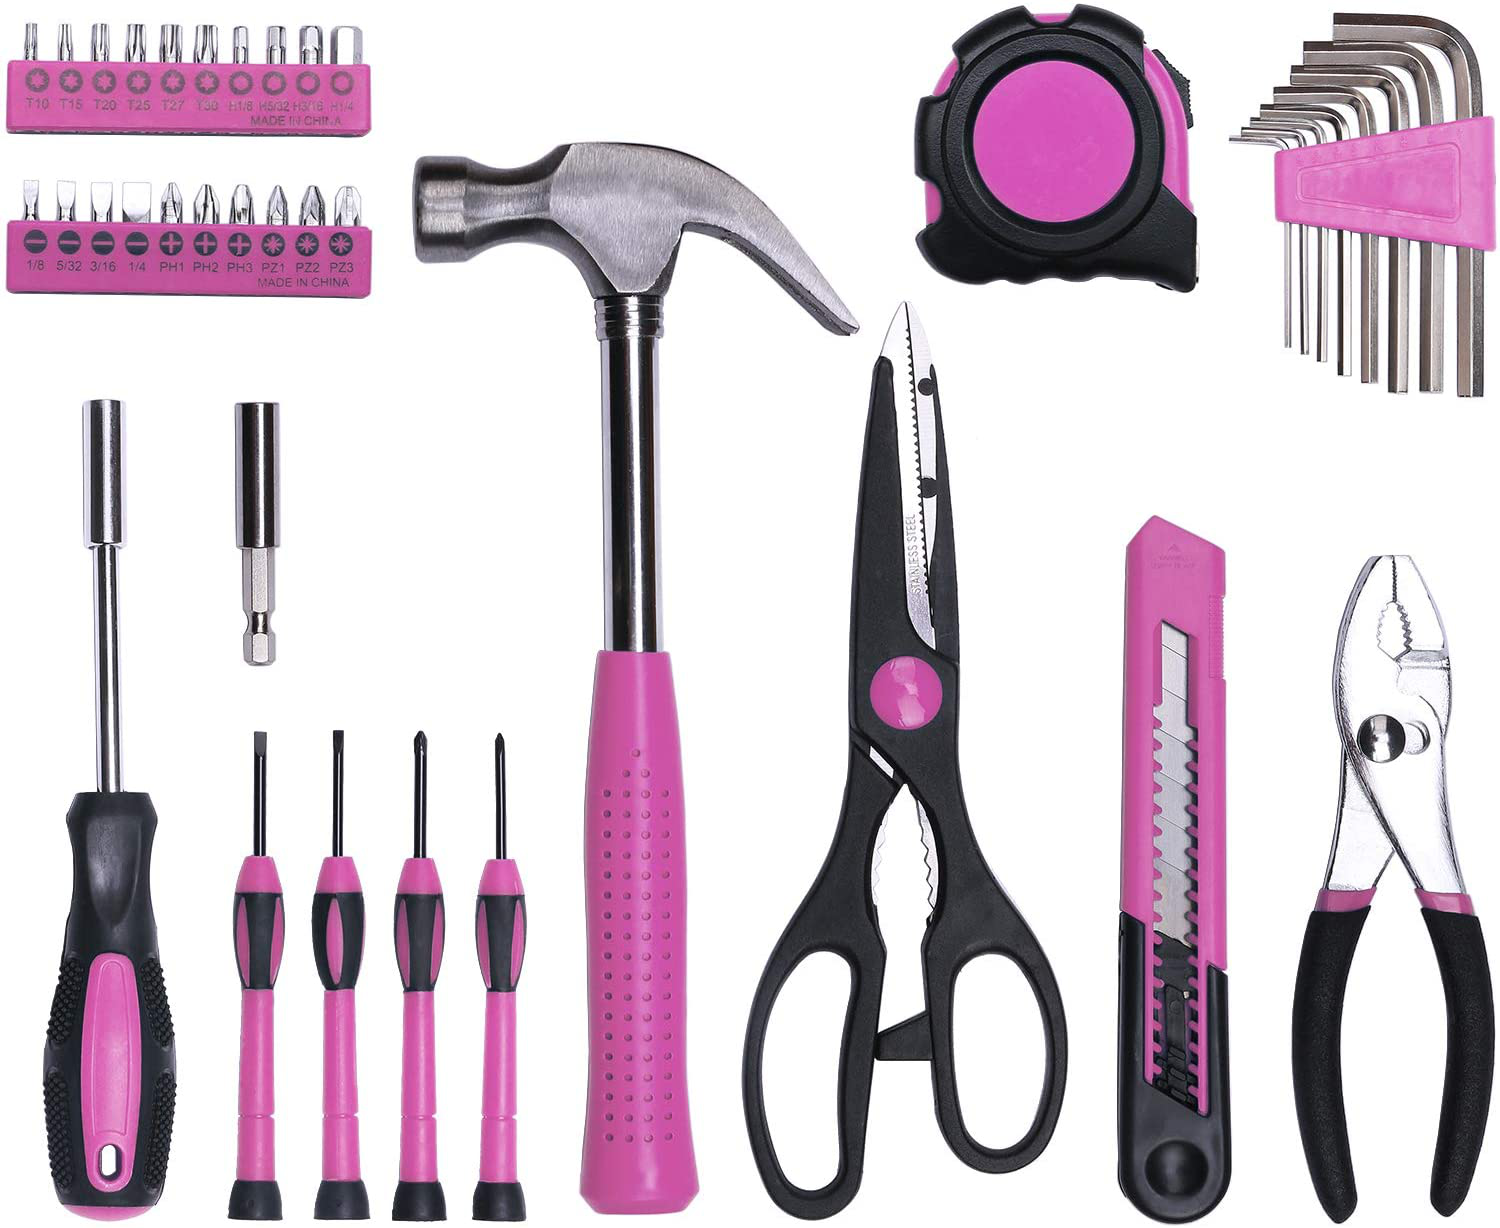 40-Piece All Purpose Household Pink Tool Kit for Girls, Ladies and Women - Includes All Essential Tools for Home, Garage, Office and College Dormitory Use